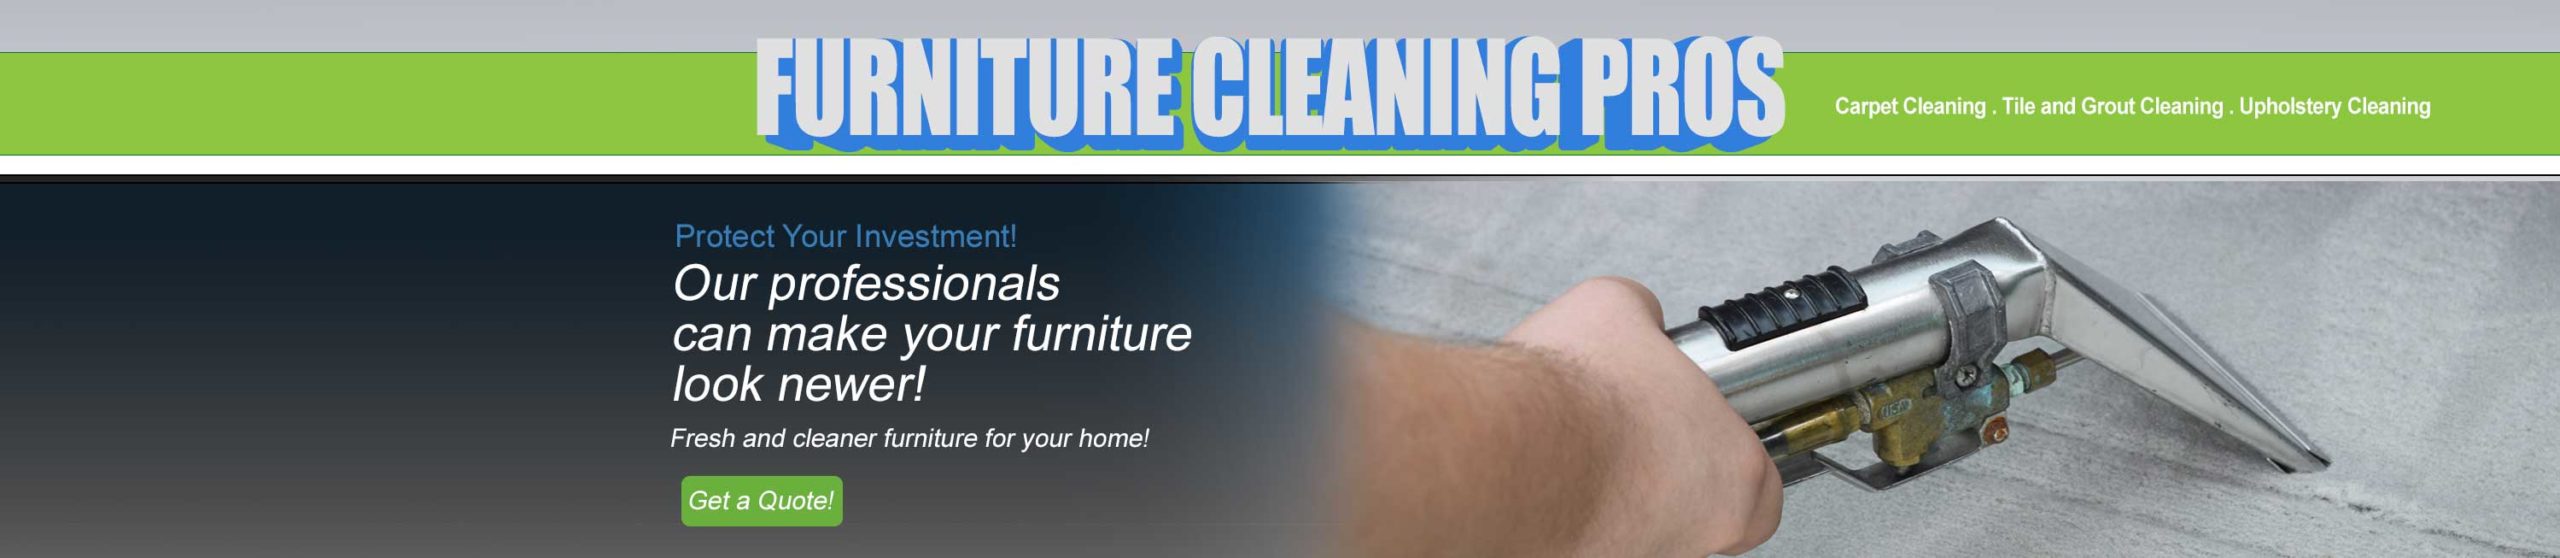 Furniture and upholstery cleaning in Chandler AZ